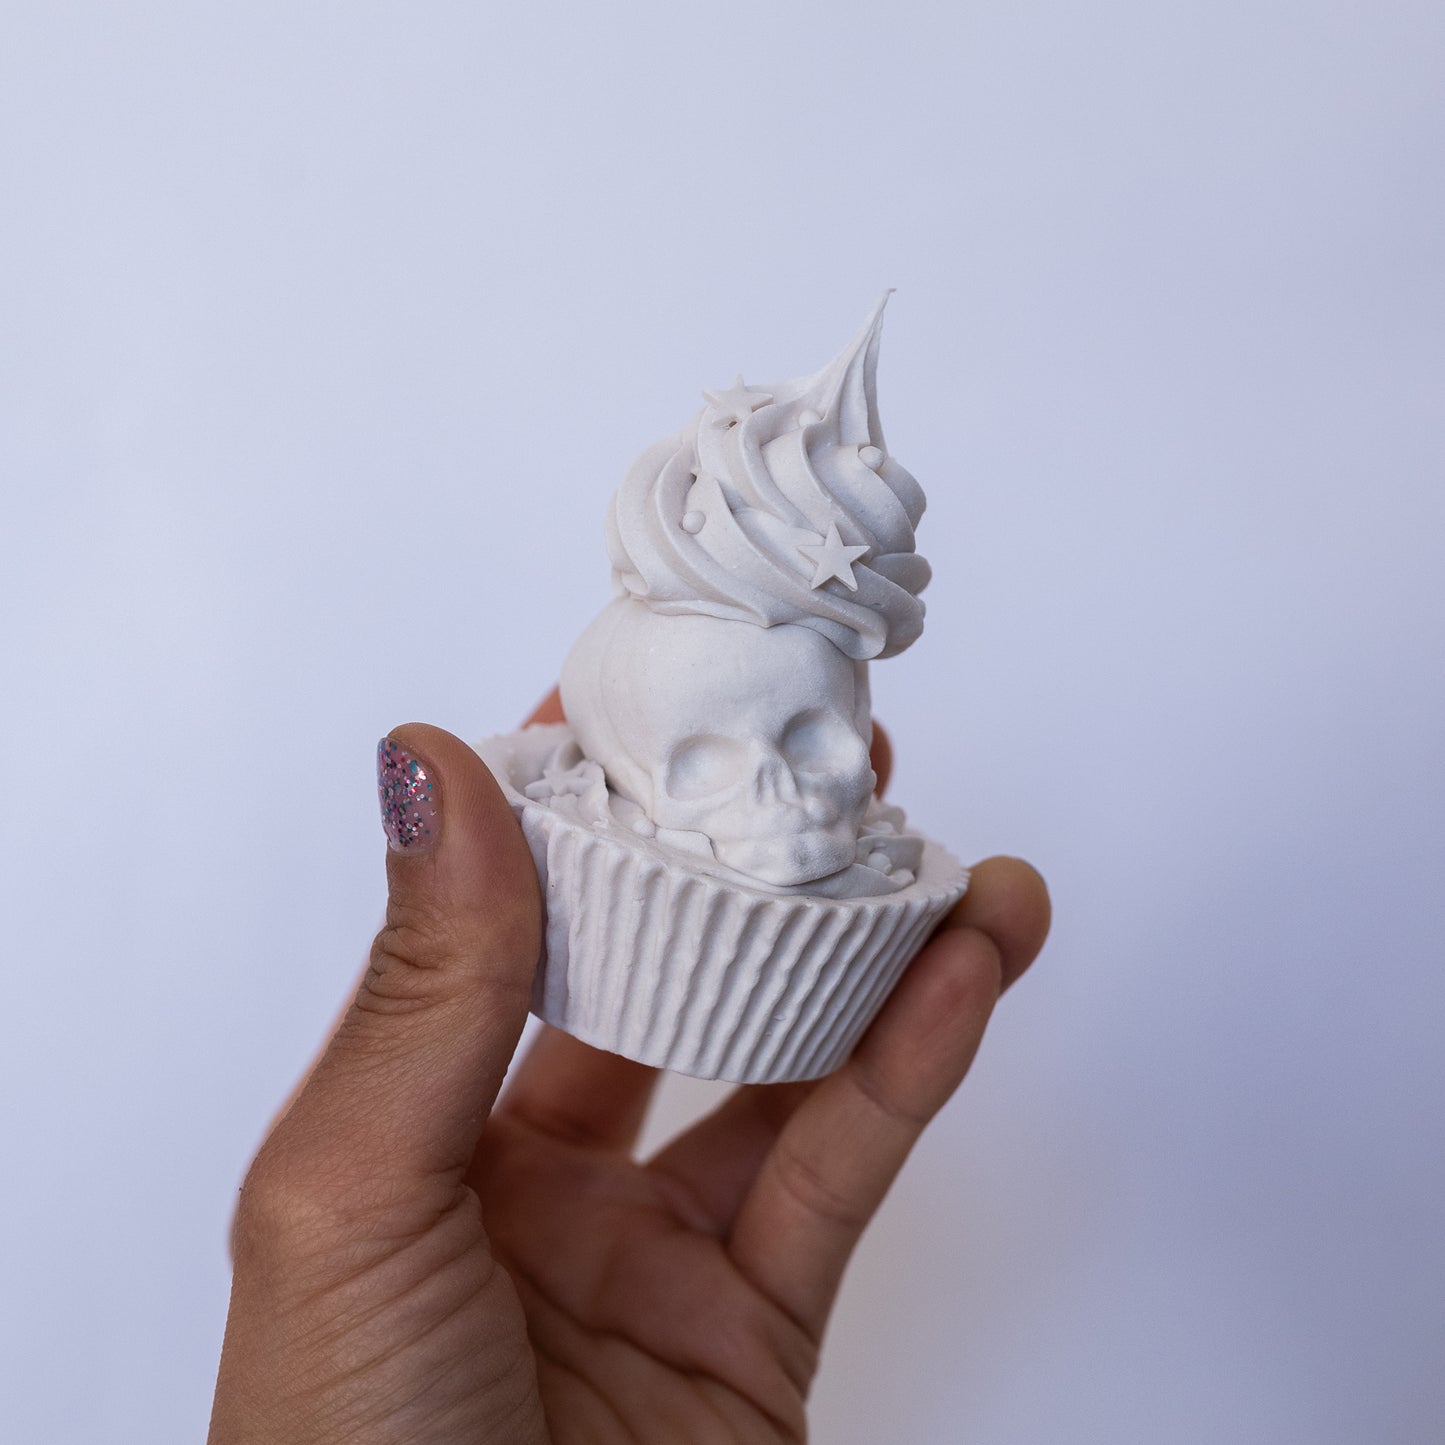 Frosted Skull Cupcake with Star Sprinkles (Limited Edition Porcelain Sculpture)